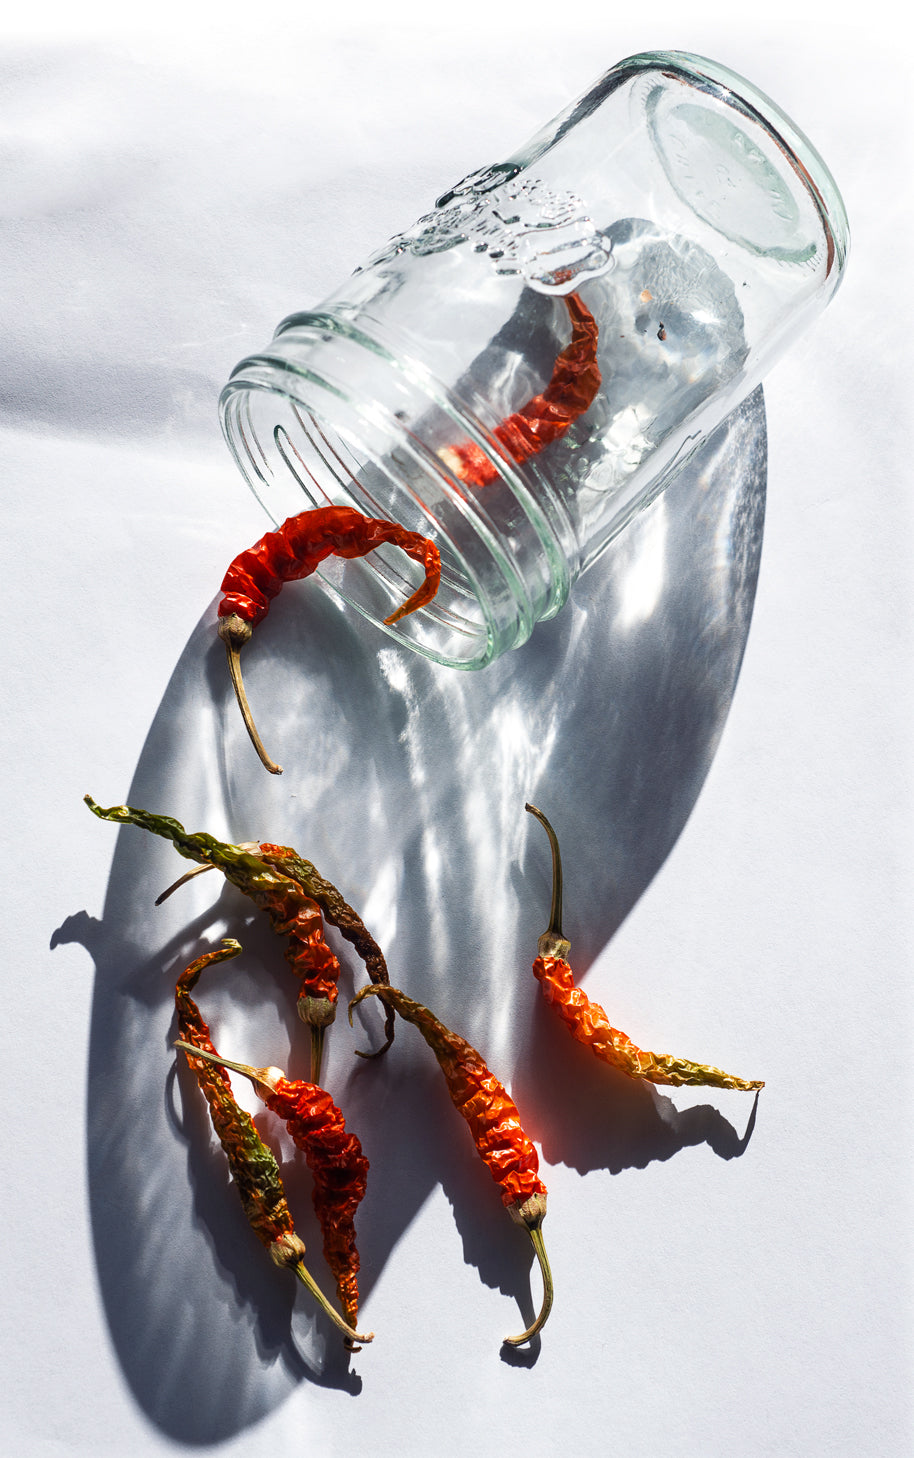 a glass jar with red chili peppers falling out of it